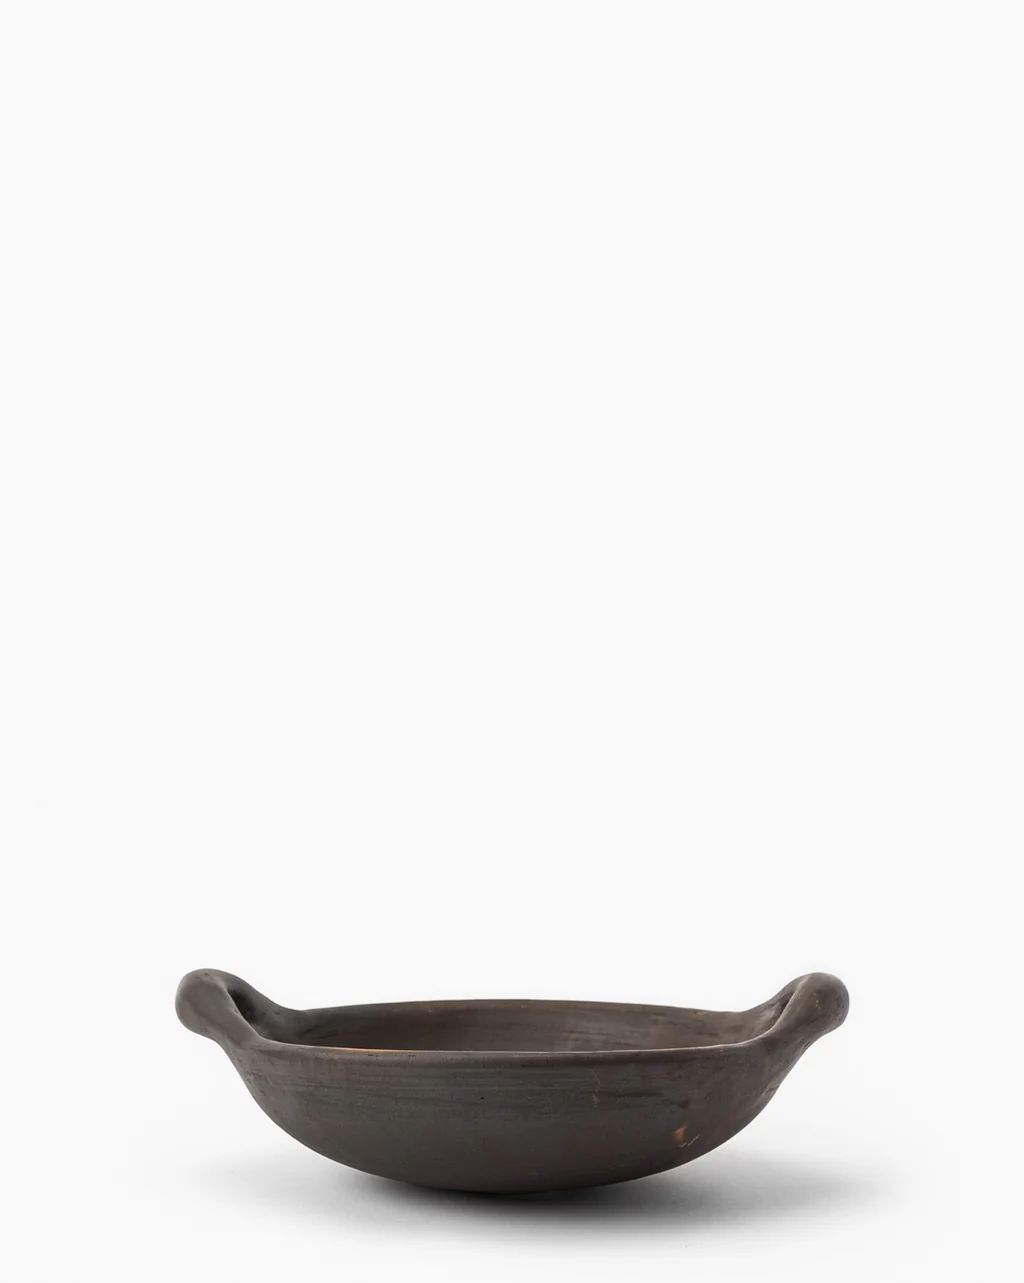 Wooden Bowl with Handles | McGee & Co.